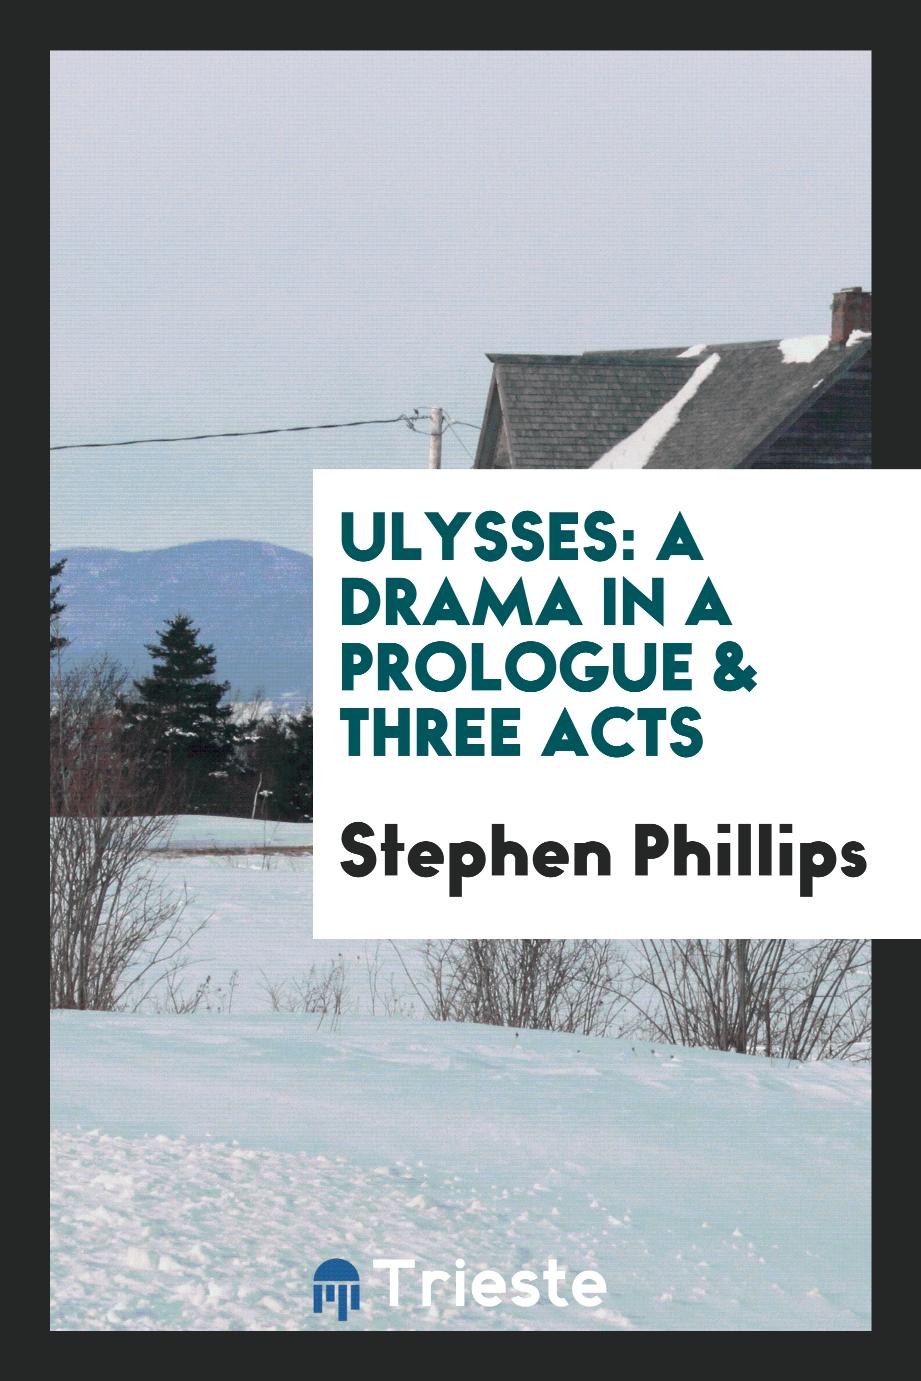 Ulysses: A Drama in a Prologue & Three Acts